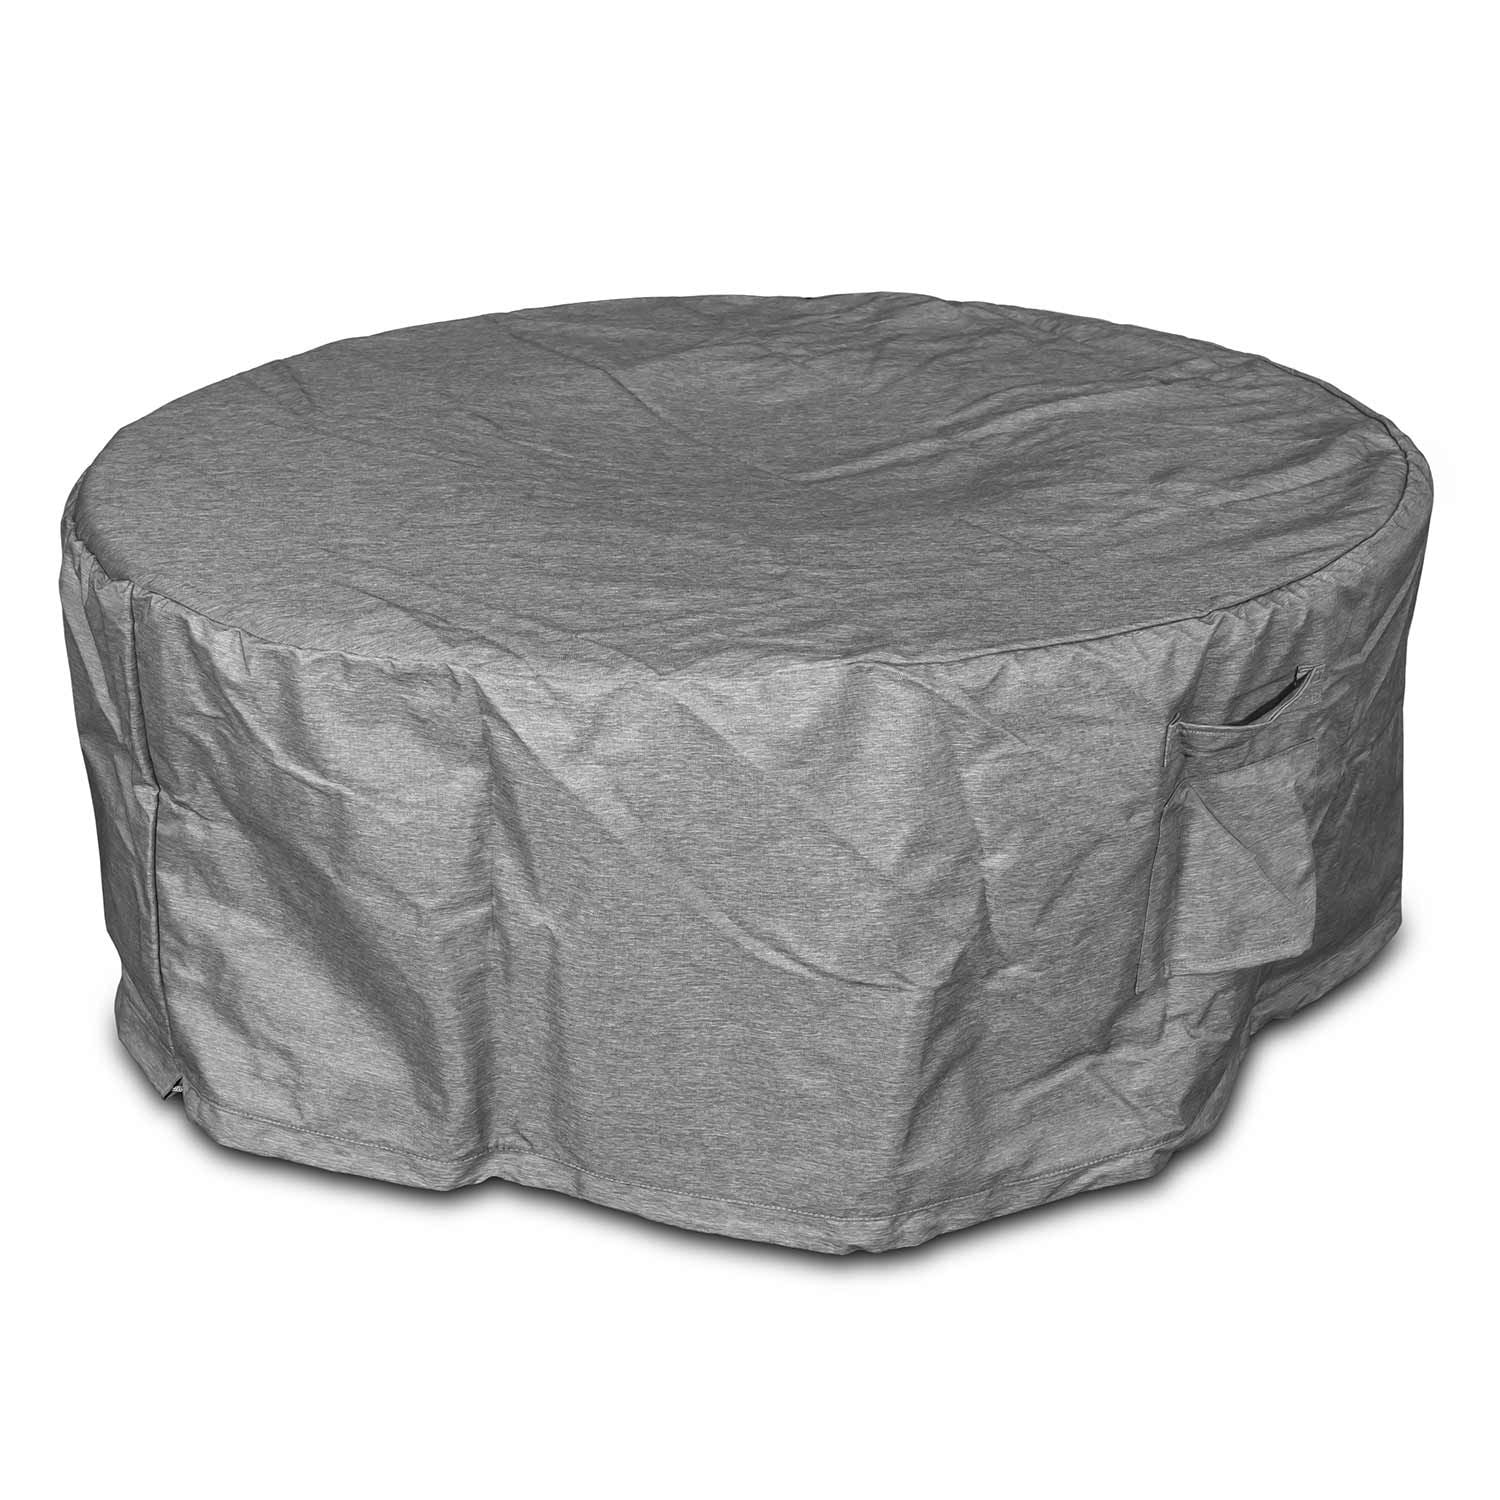 Grand Canyon COVER-ORFT-4848 Cover for Olympus Round Concrete Fire Pit, 48-Inch